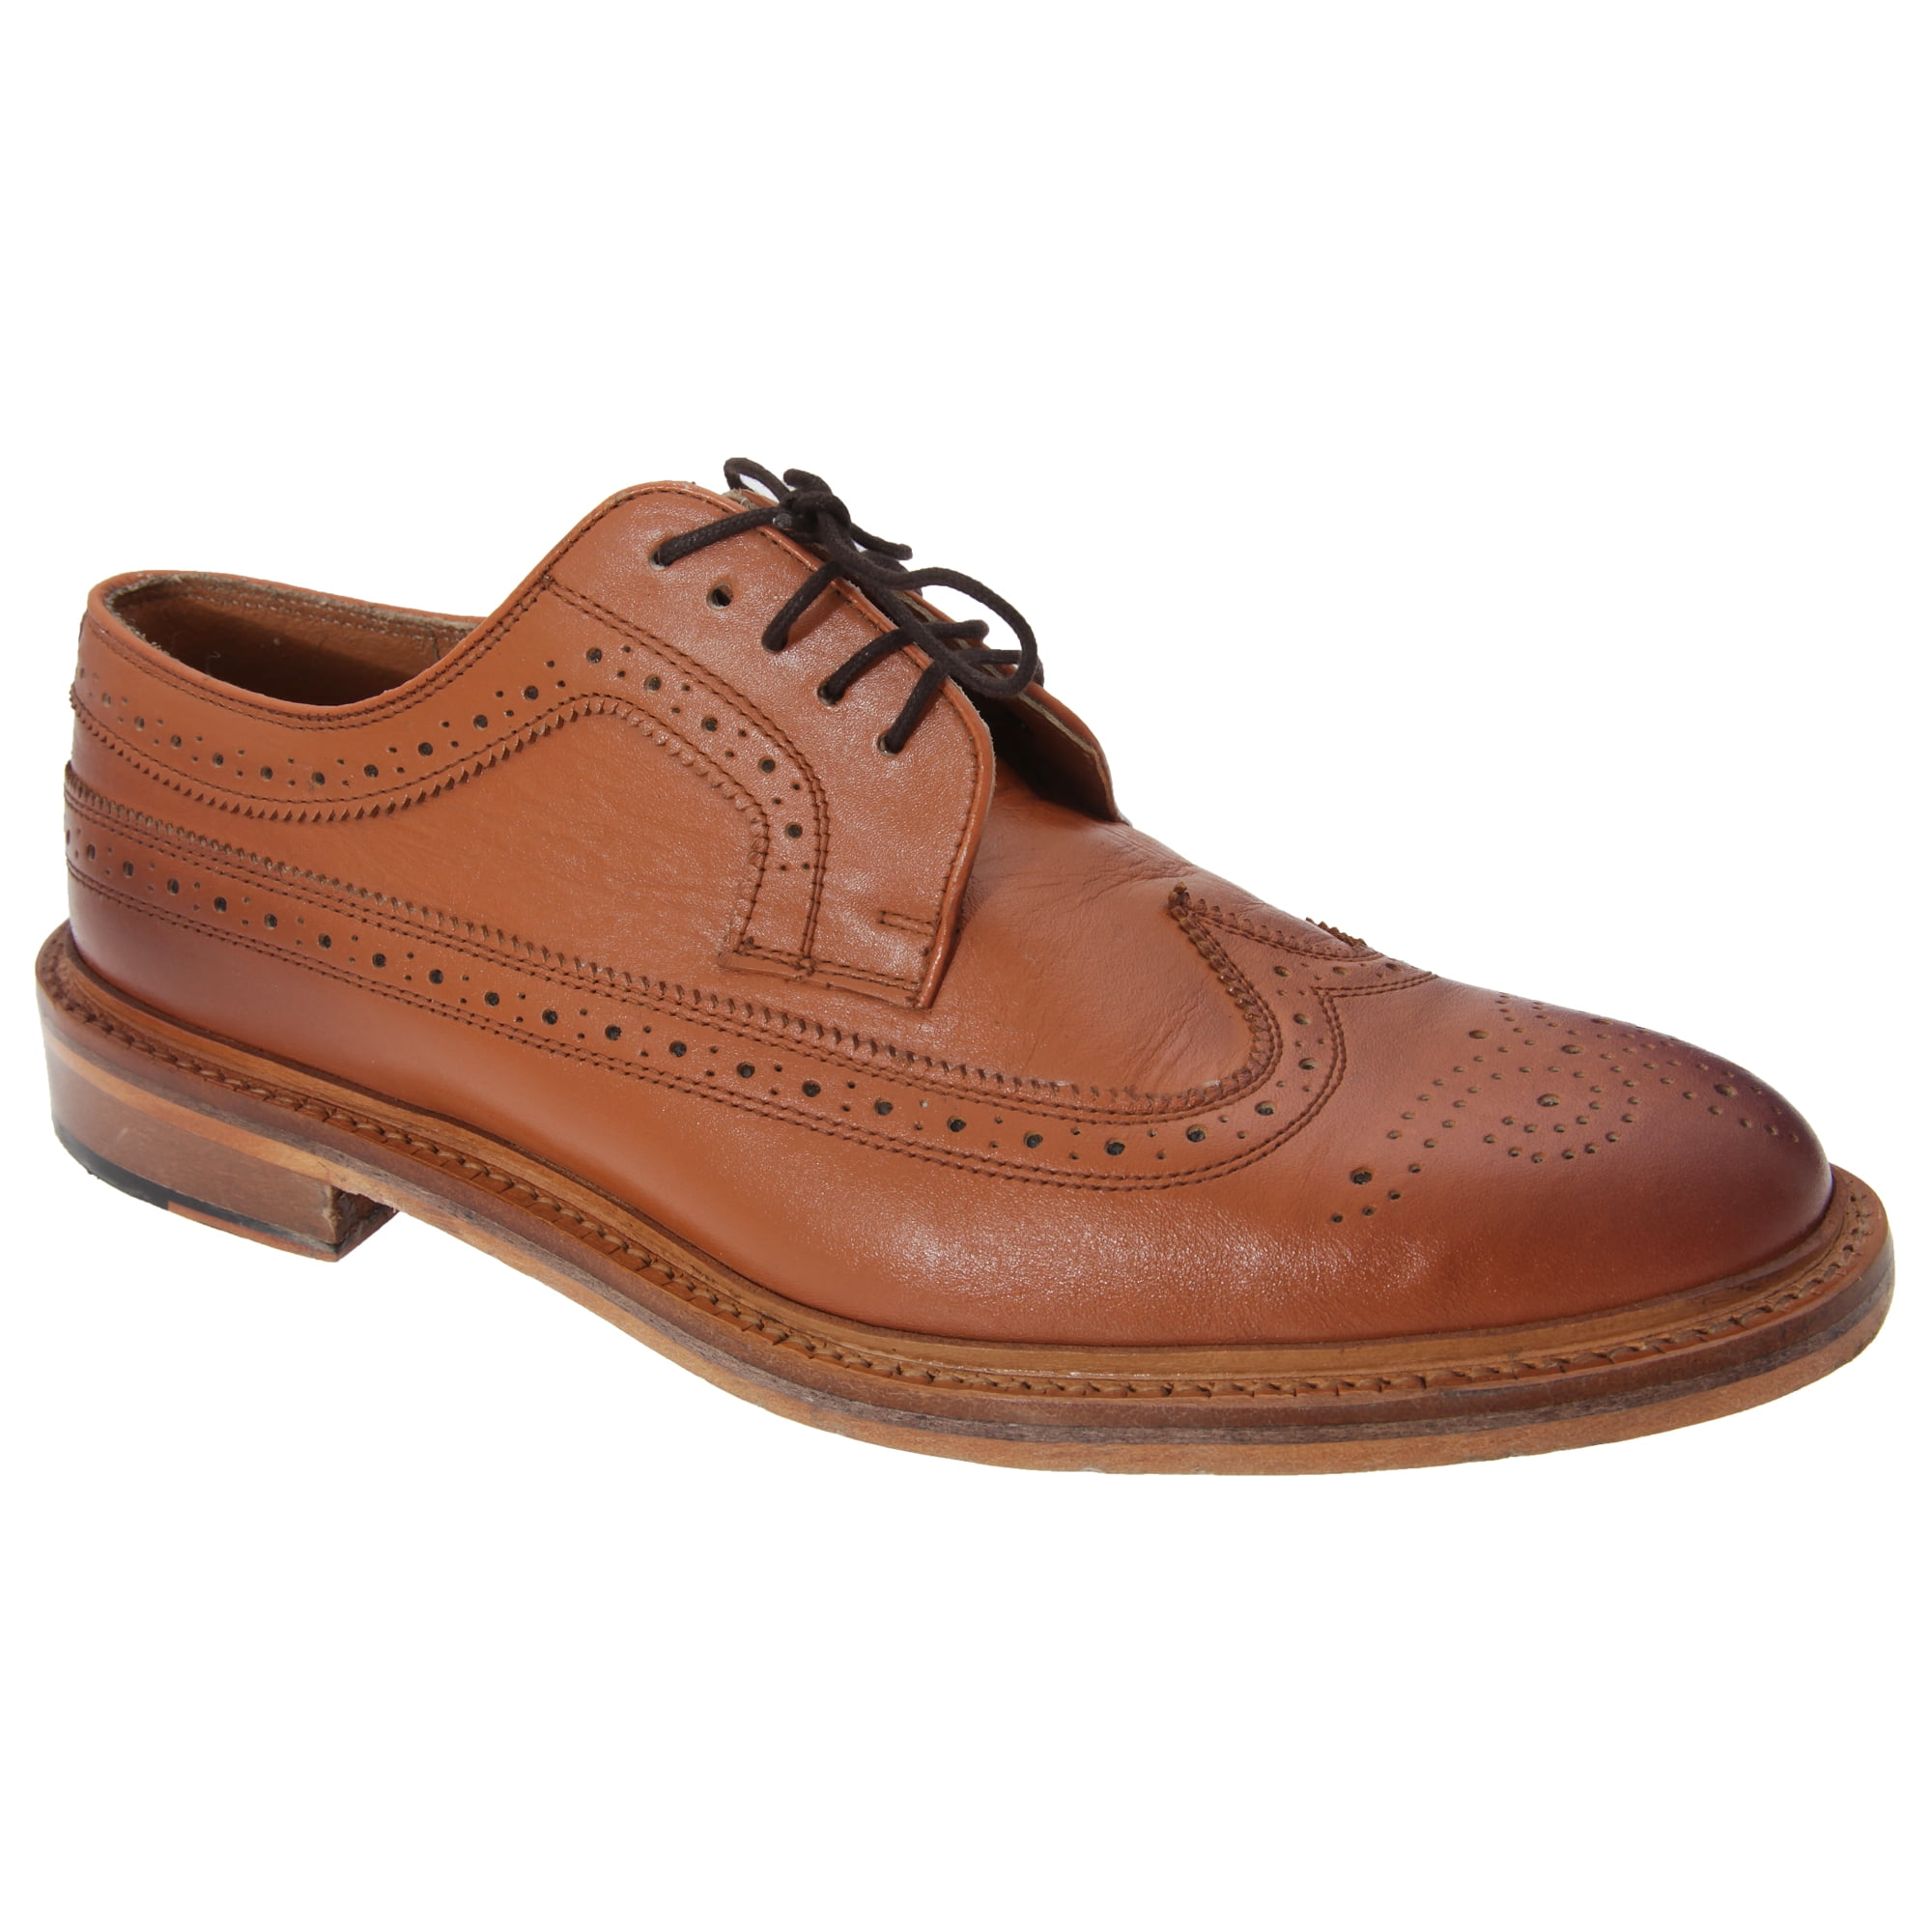 MENS REAL LEATHER TAN BROGUE COMMANDO SOLE GOOD YEAR WELTED LACE UP SHOES SIZE 